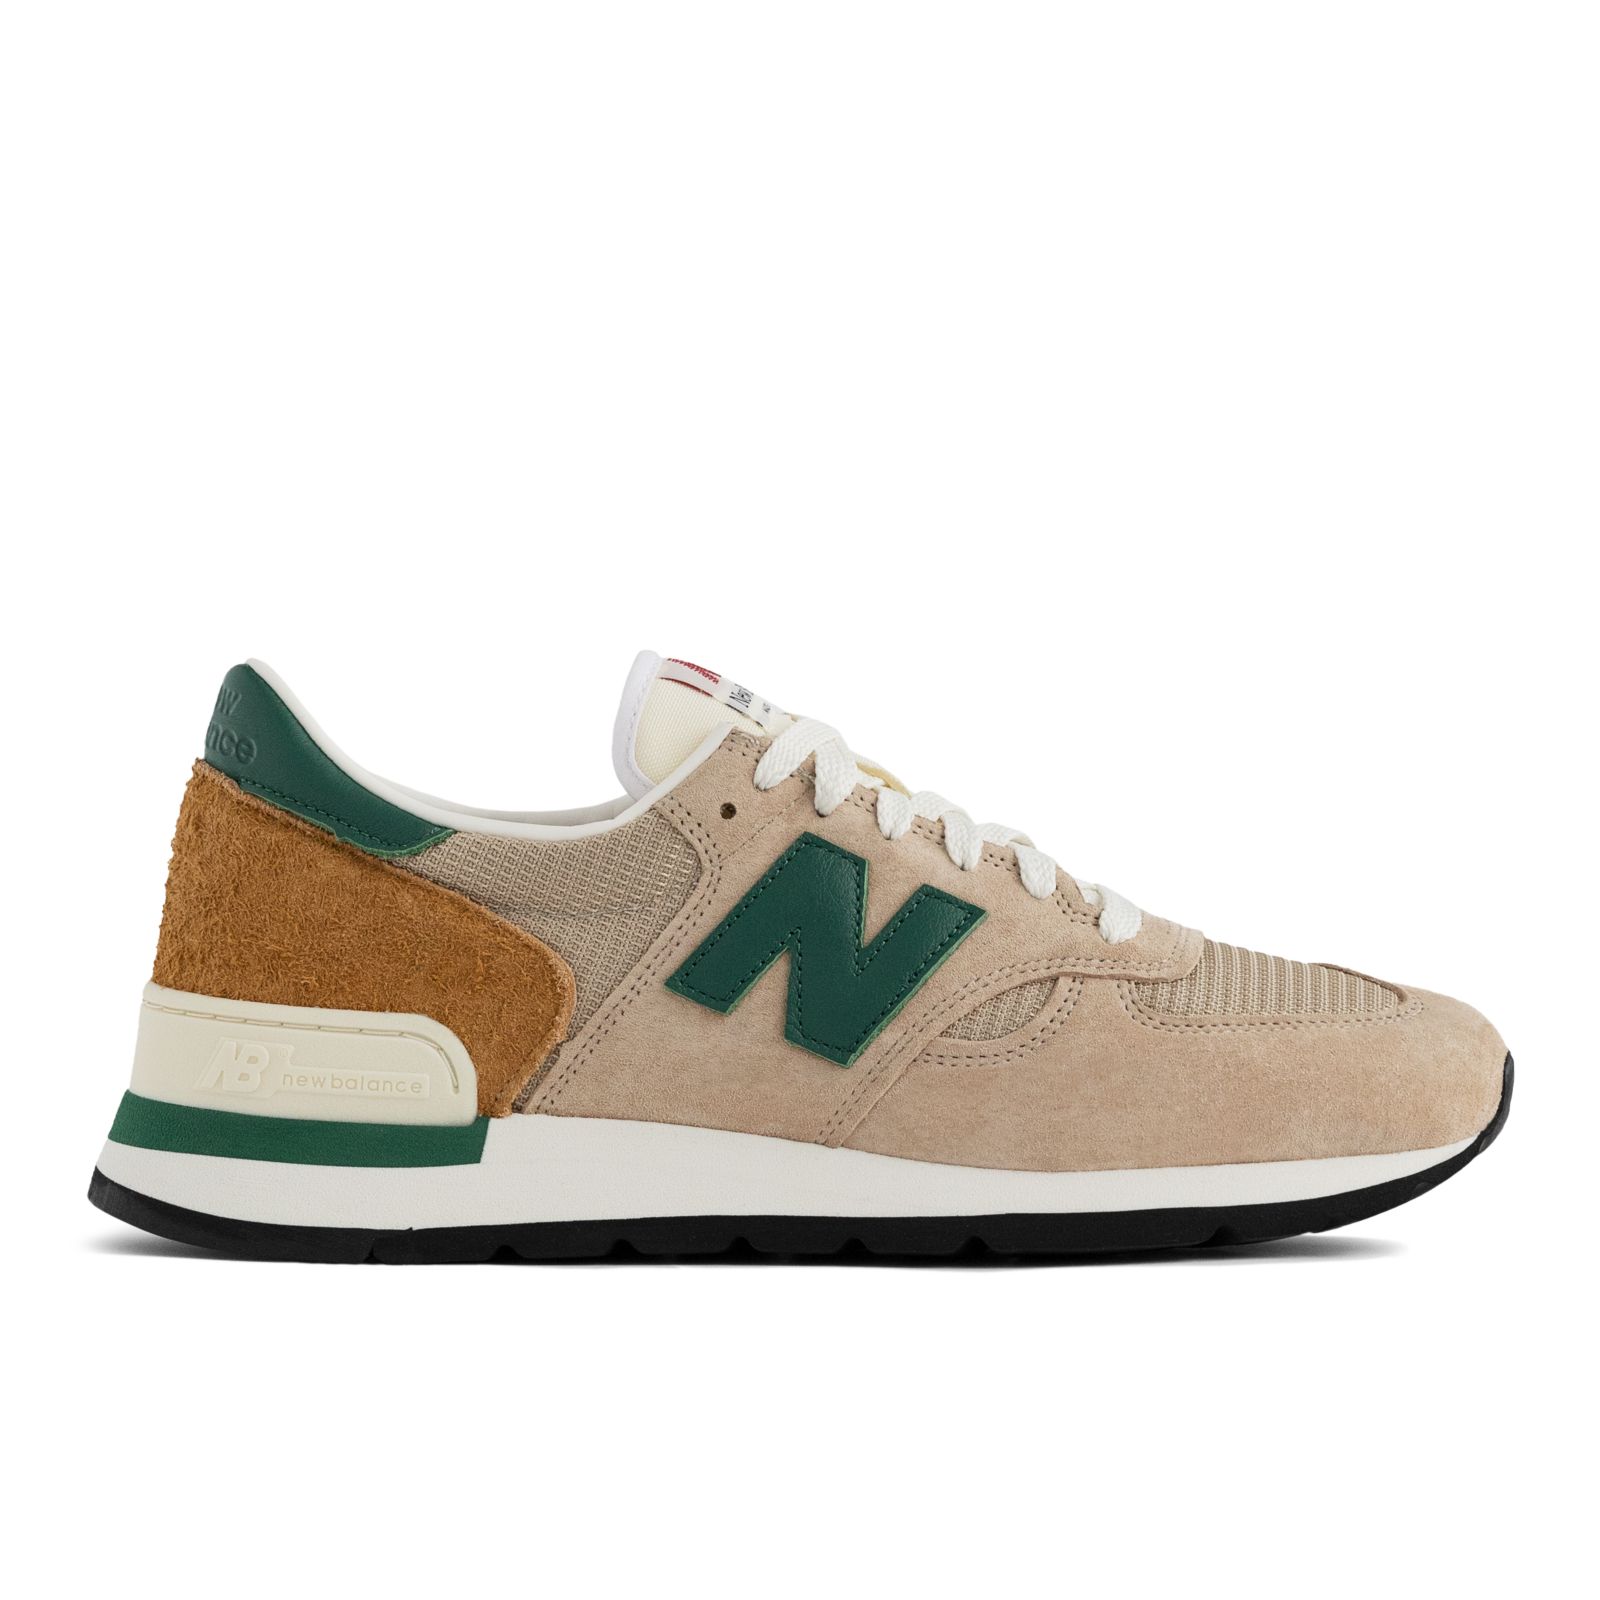 Oswald Mostrarte Sin personal MADE in USA 990 - New Balance